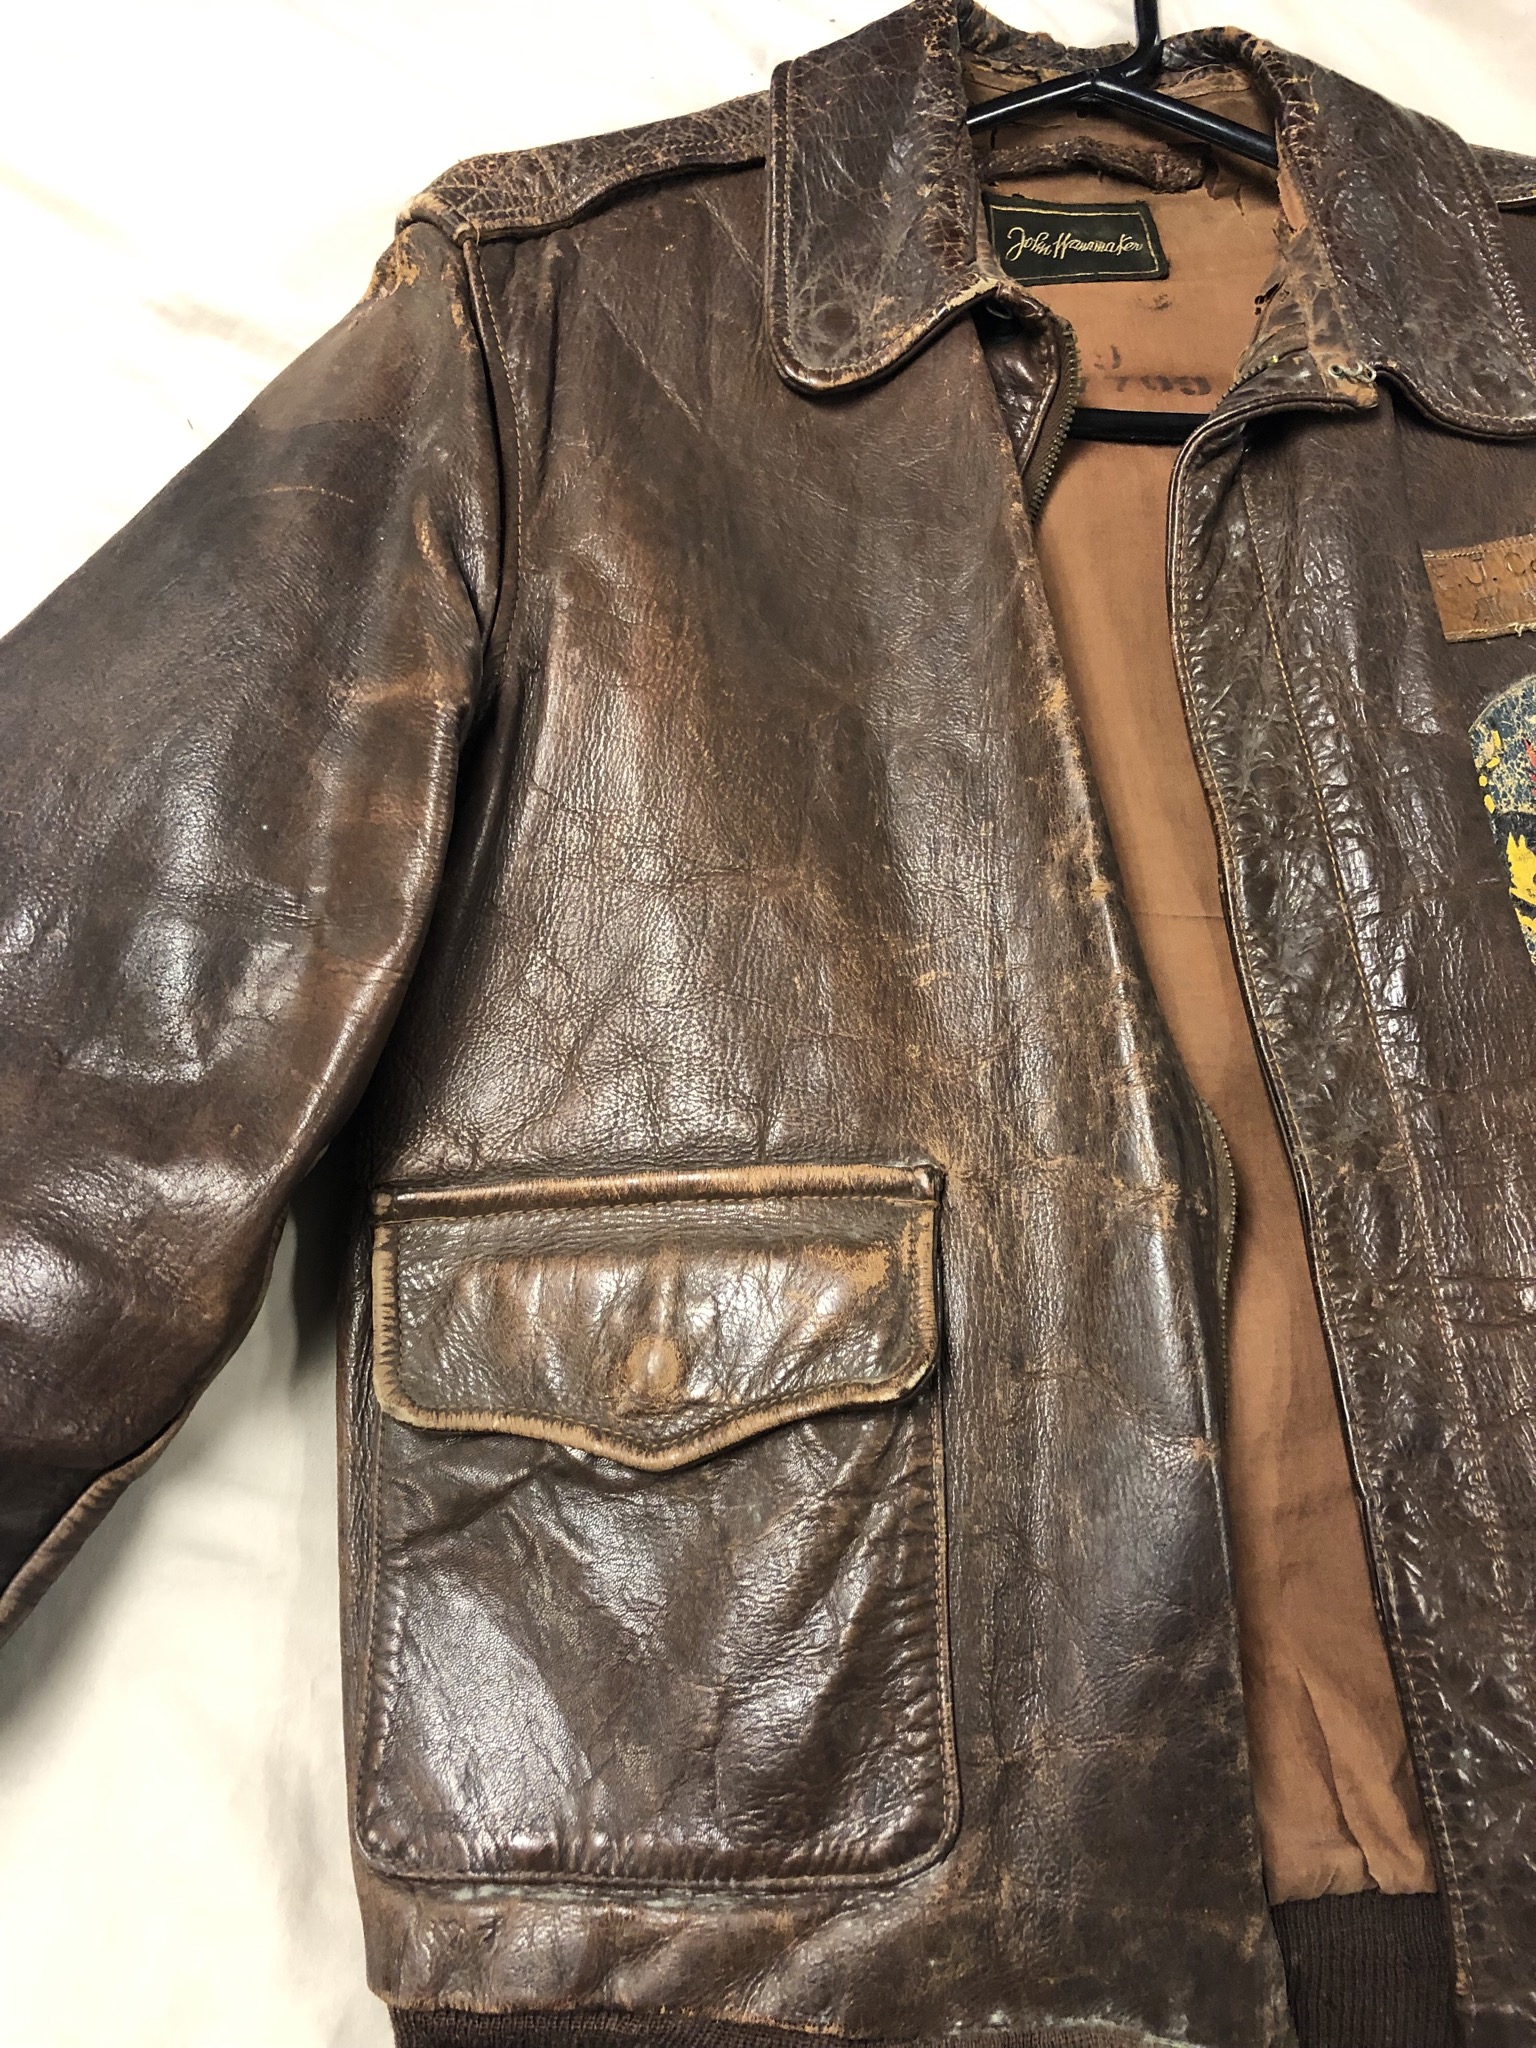 An Original A2 with a cool history! | Vintage Leather Jackets Forum